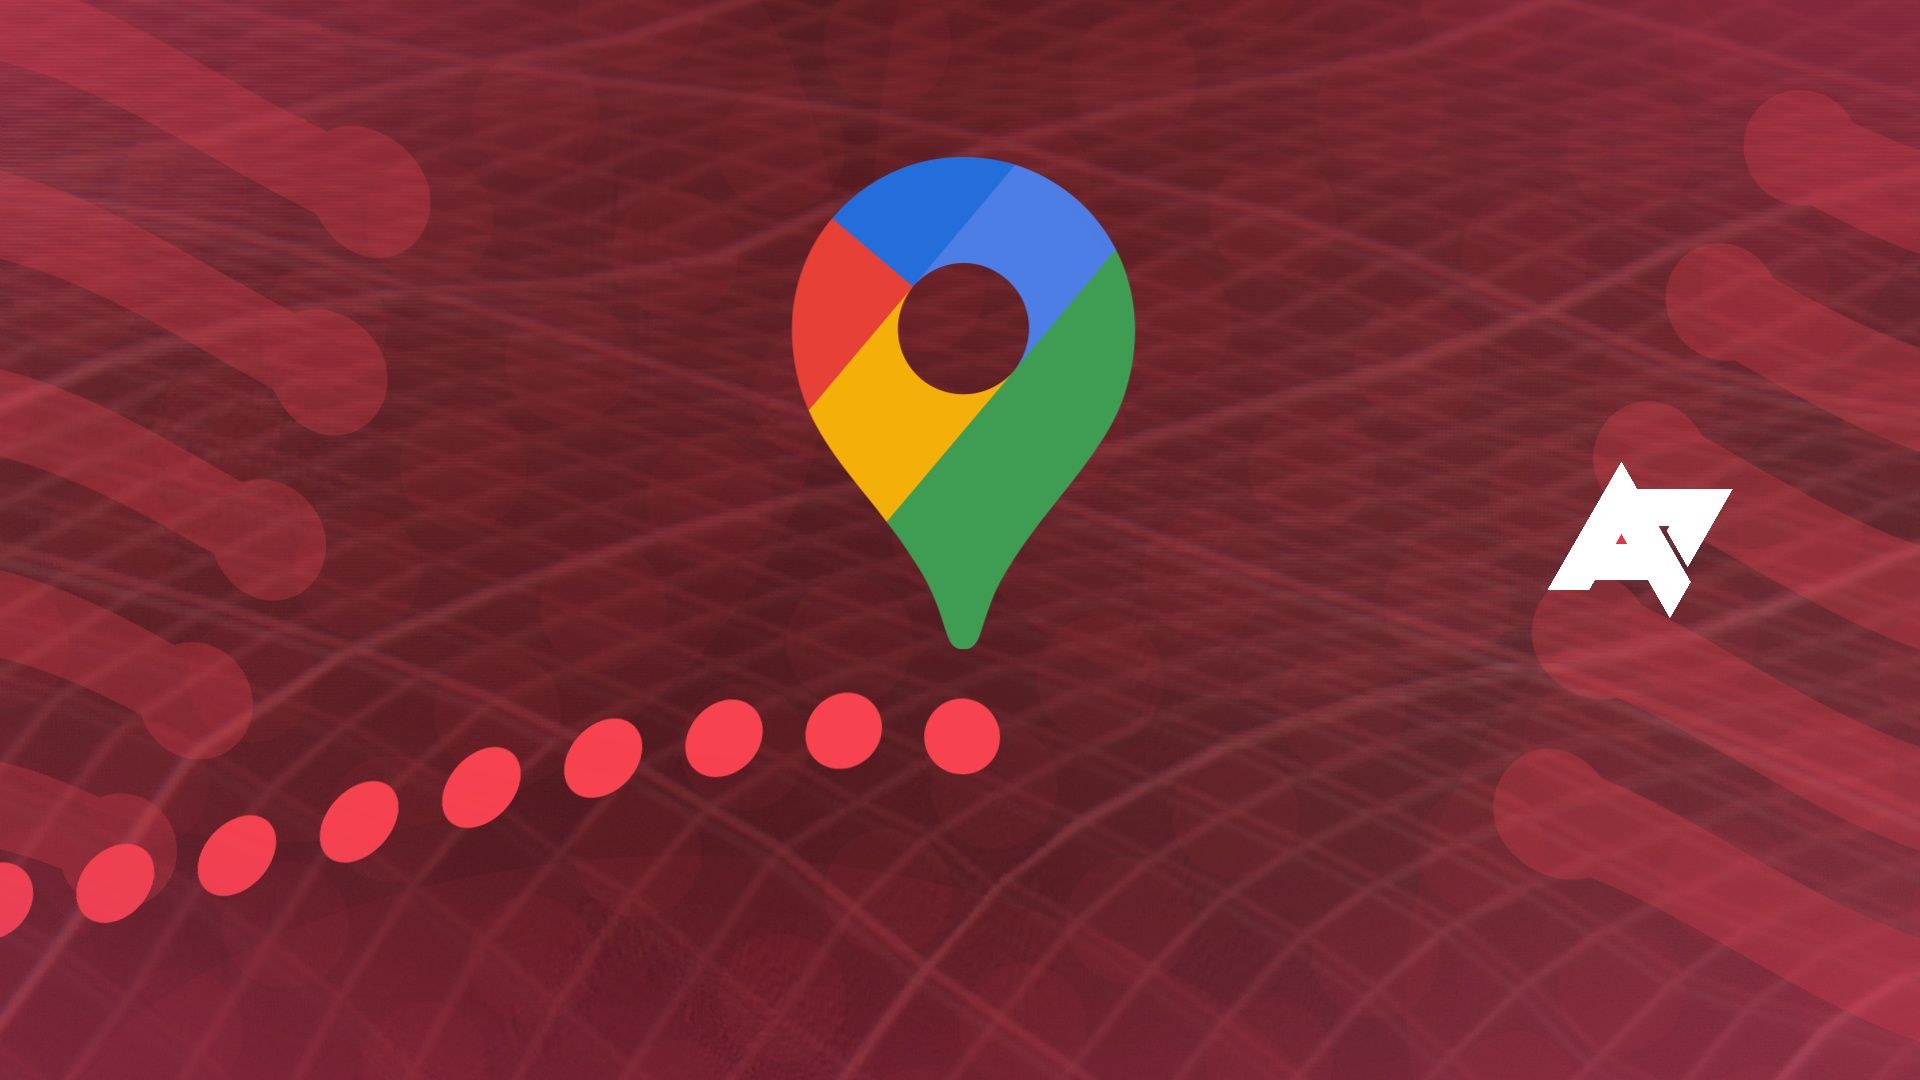 Here’s our first look at Google Maps’ new generative AI recommendations